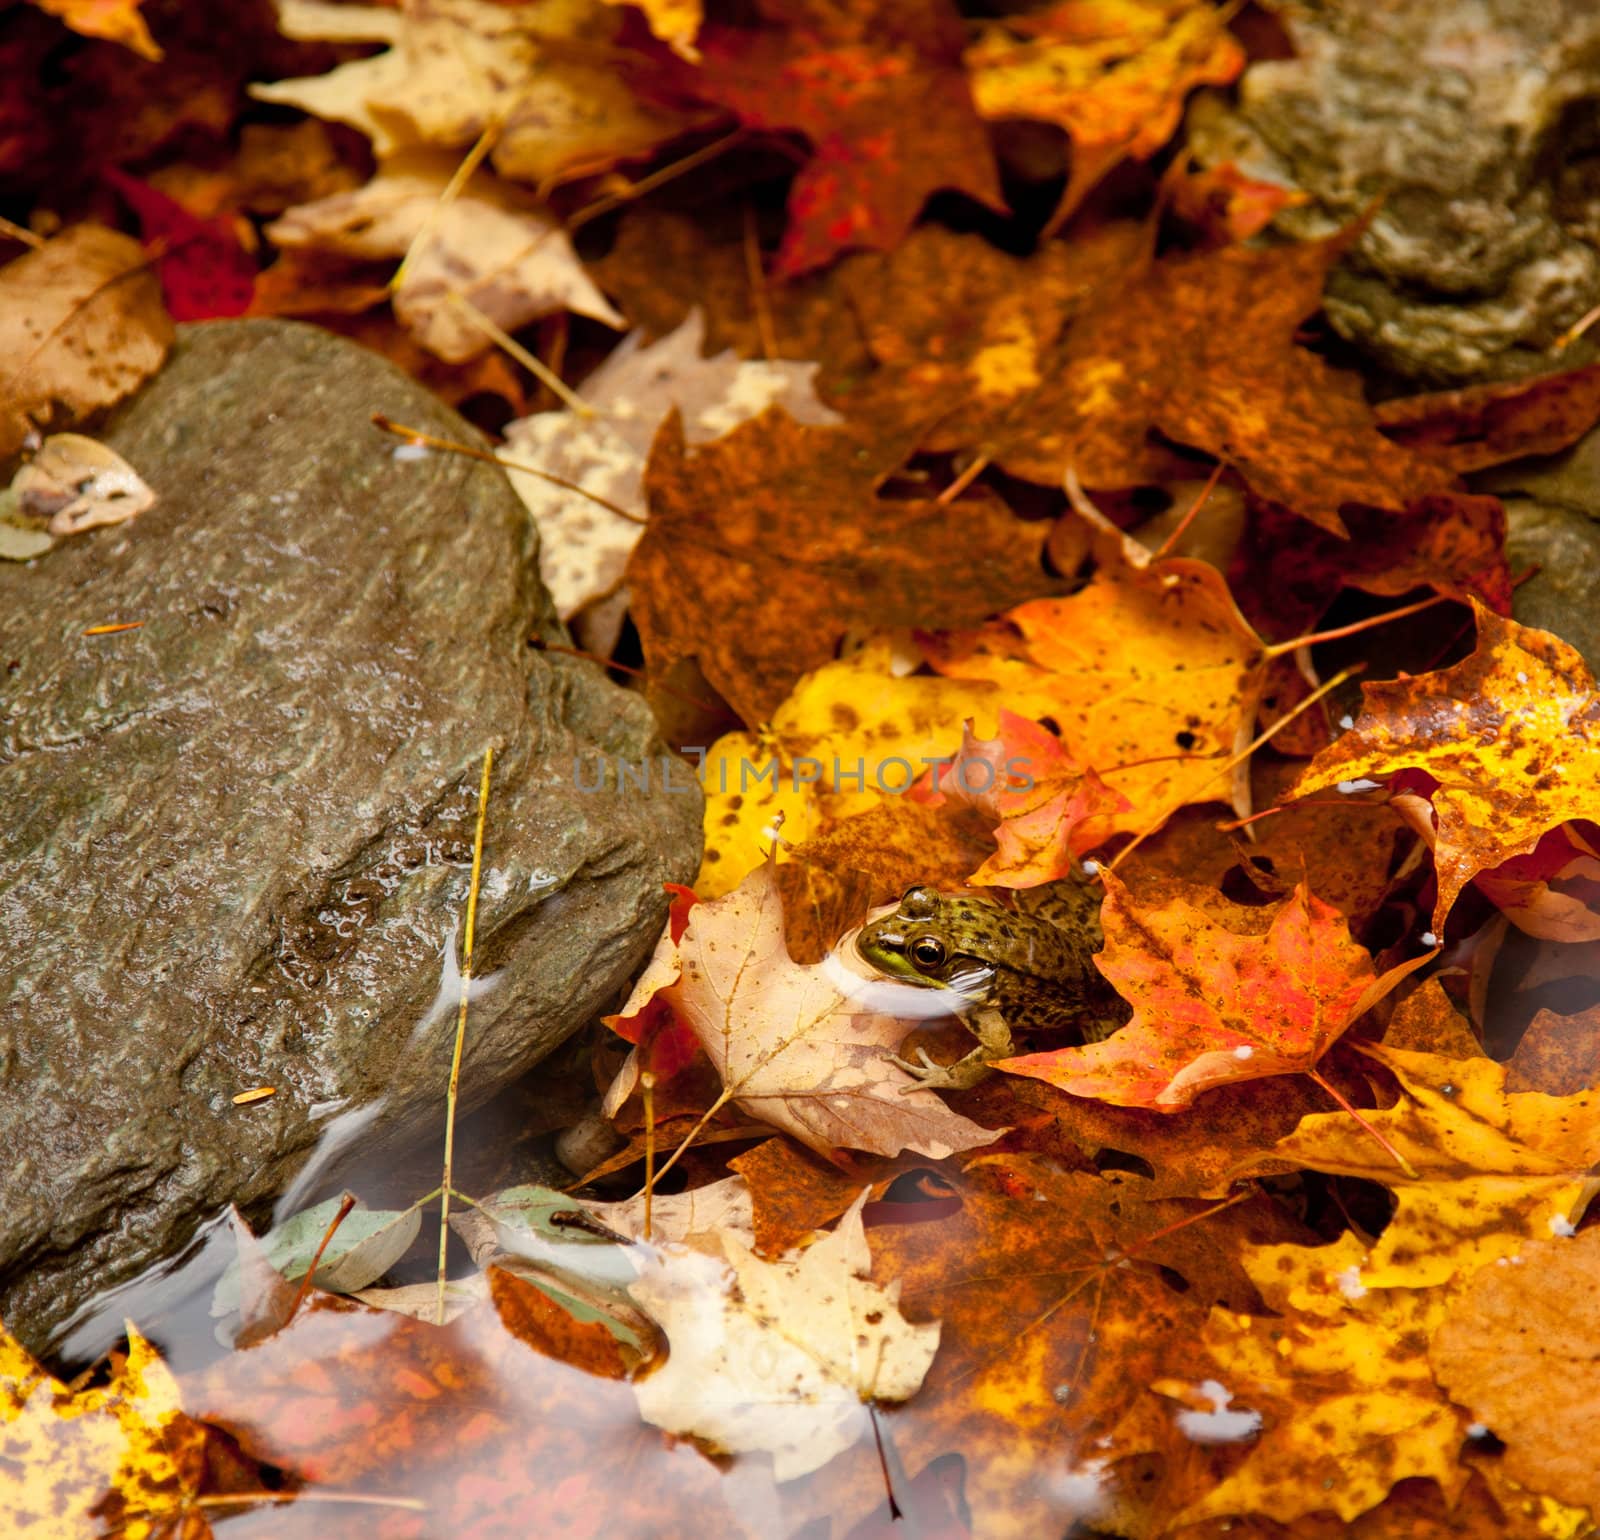 Frog deep in fall leaves by steheap